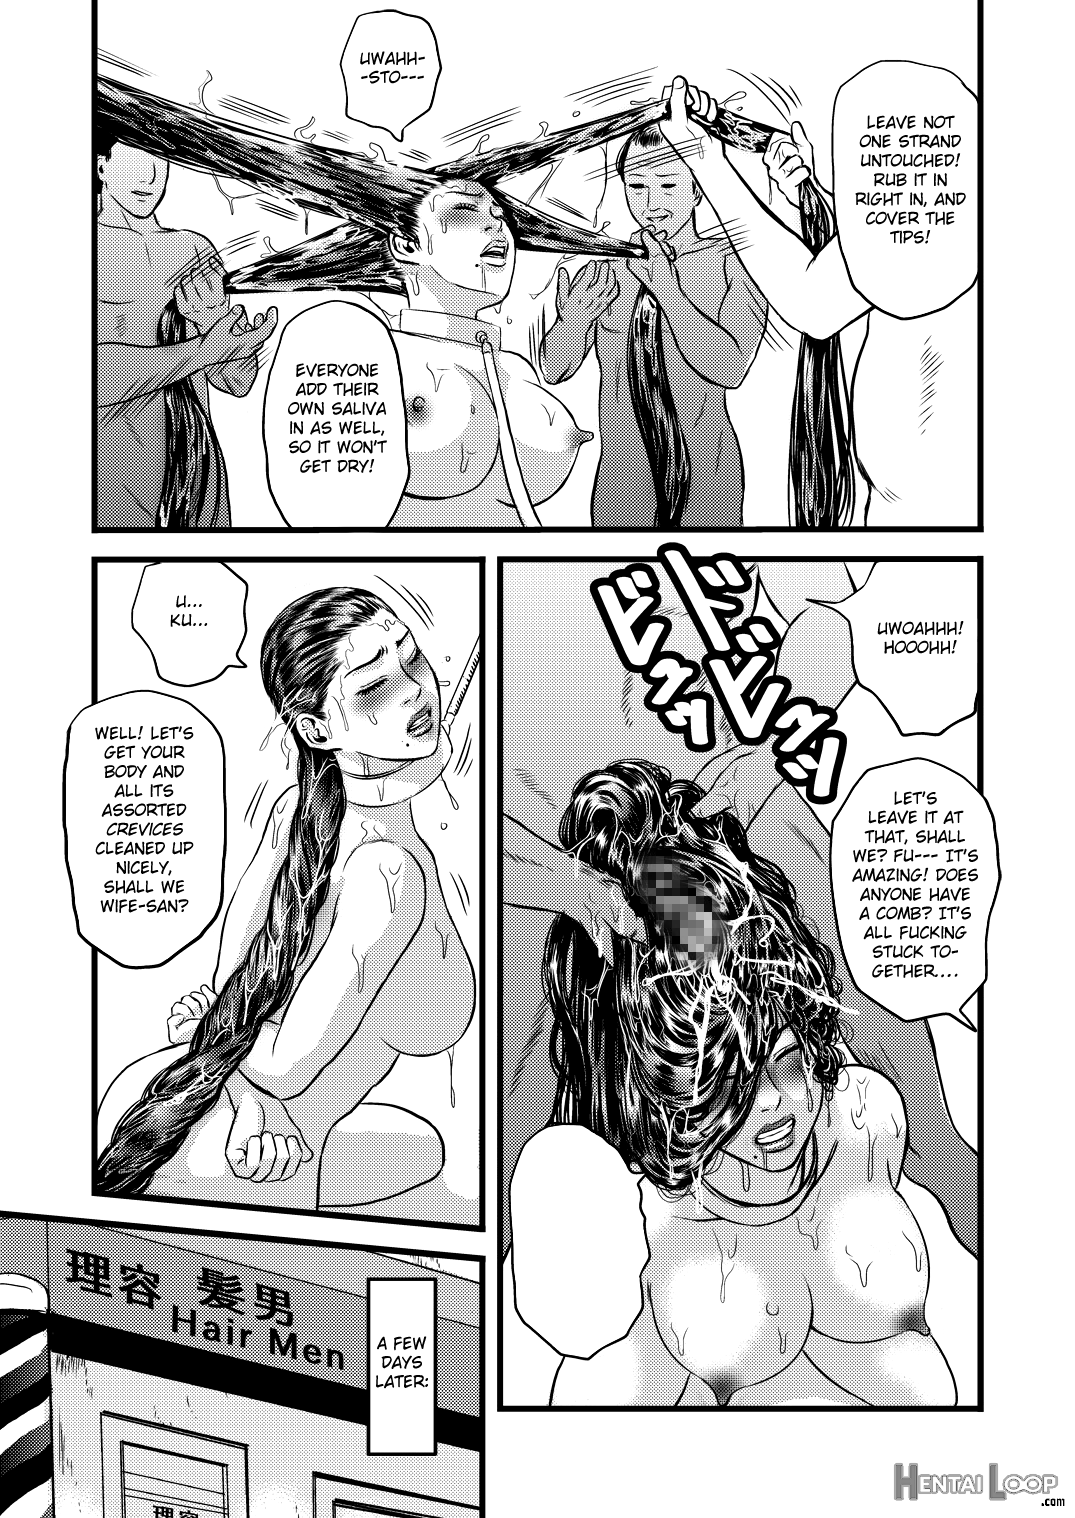 Our Married Sex Slave: Final. page 8